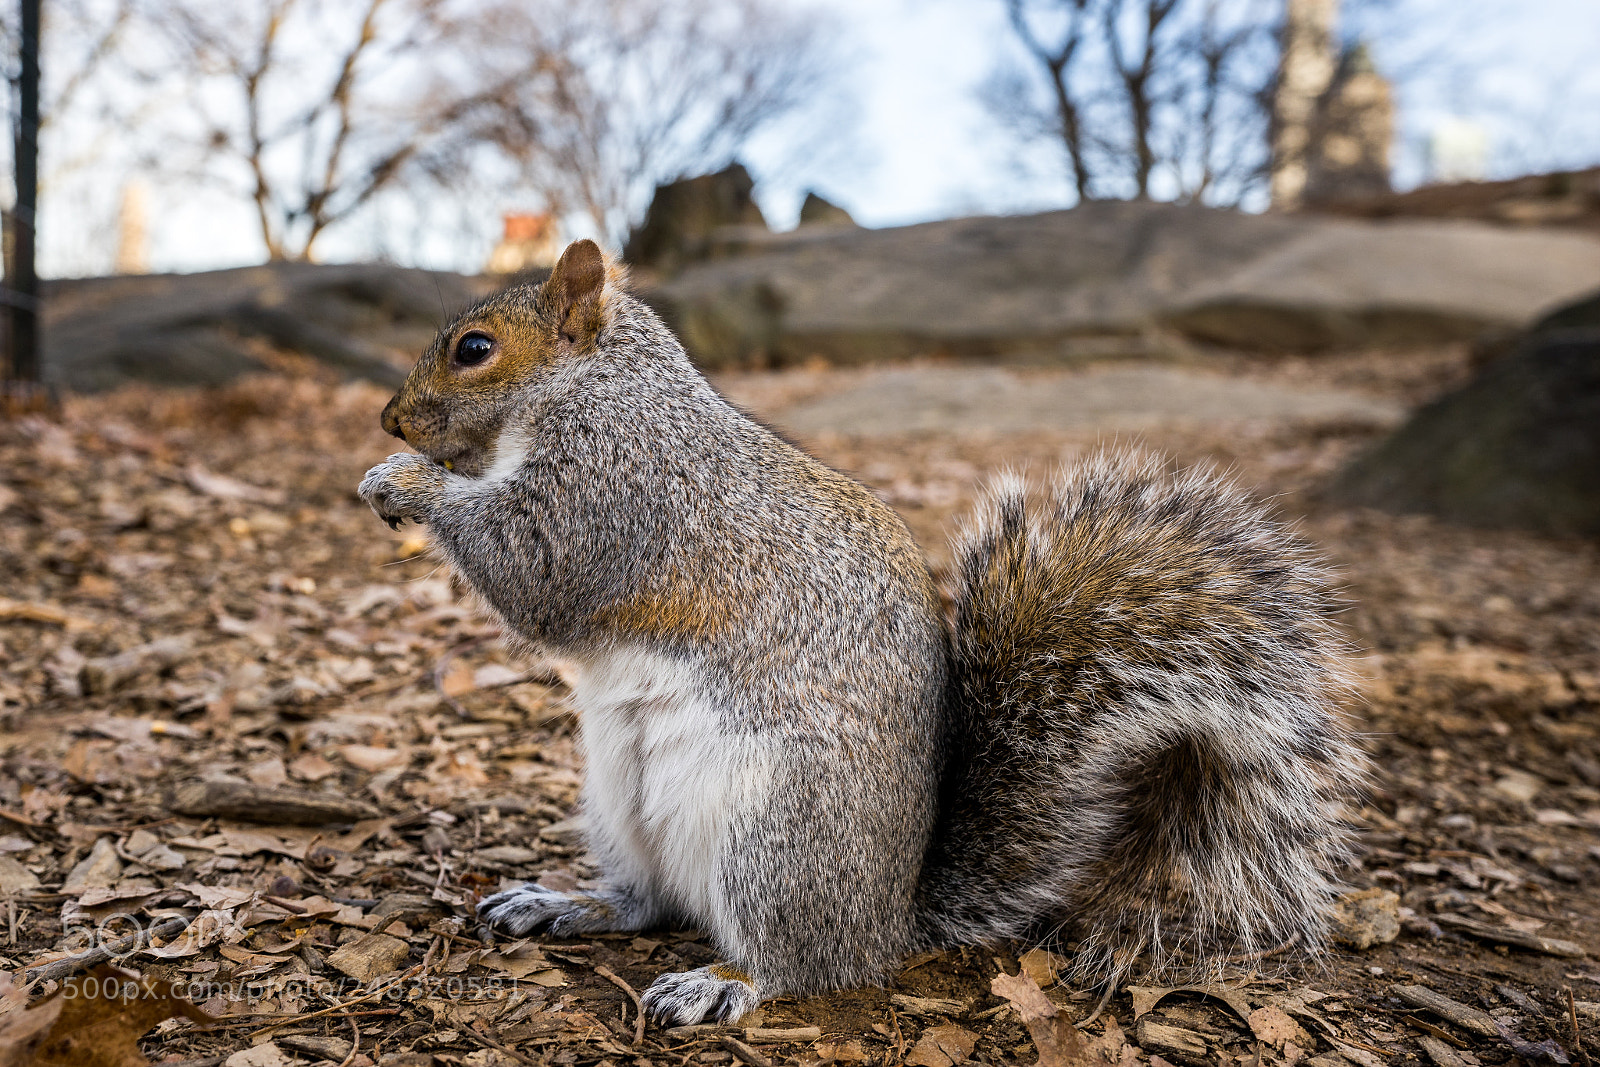 Sony a7 sample photo. Squirrel in central park photography